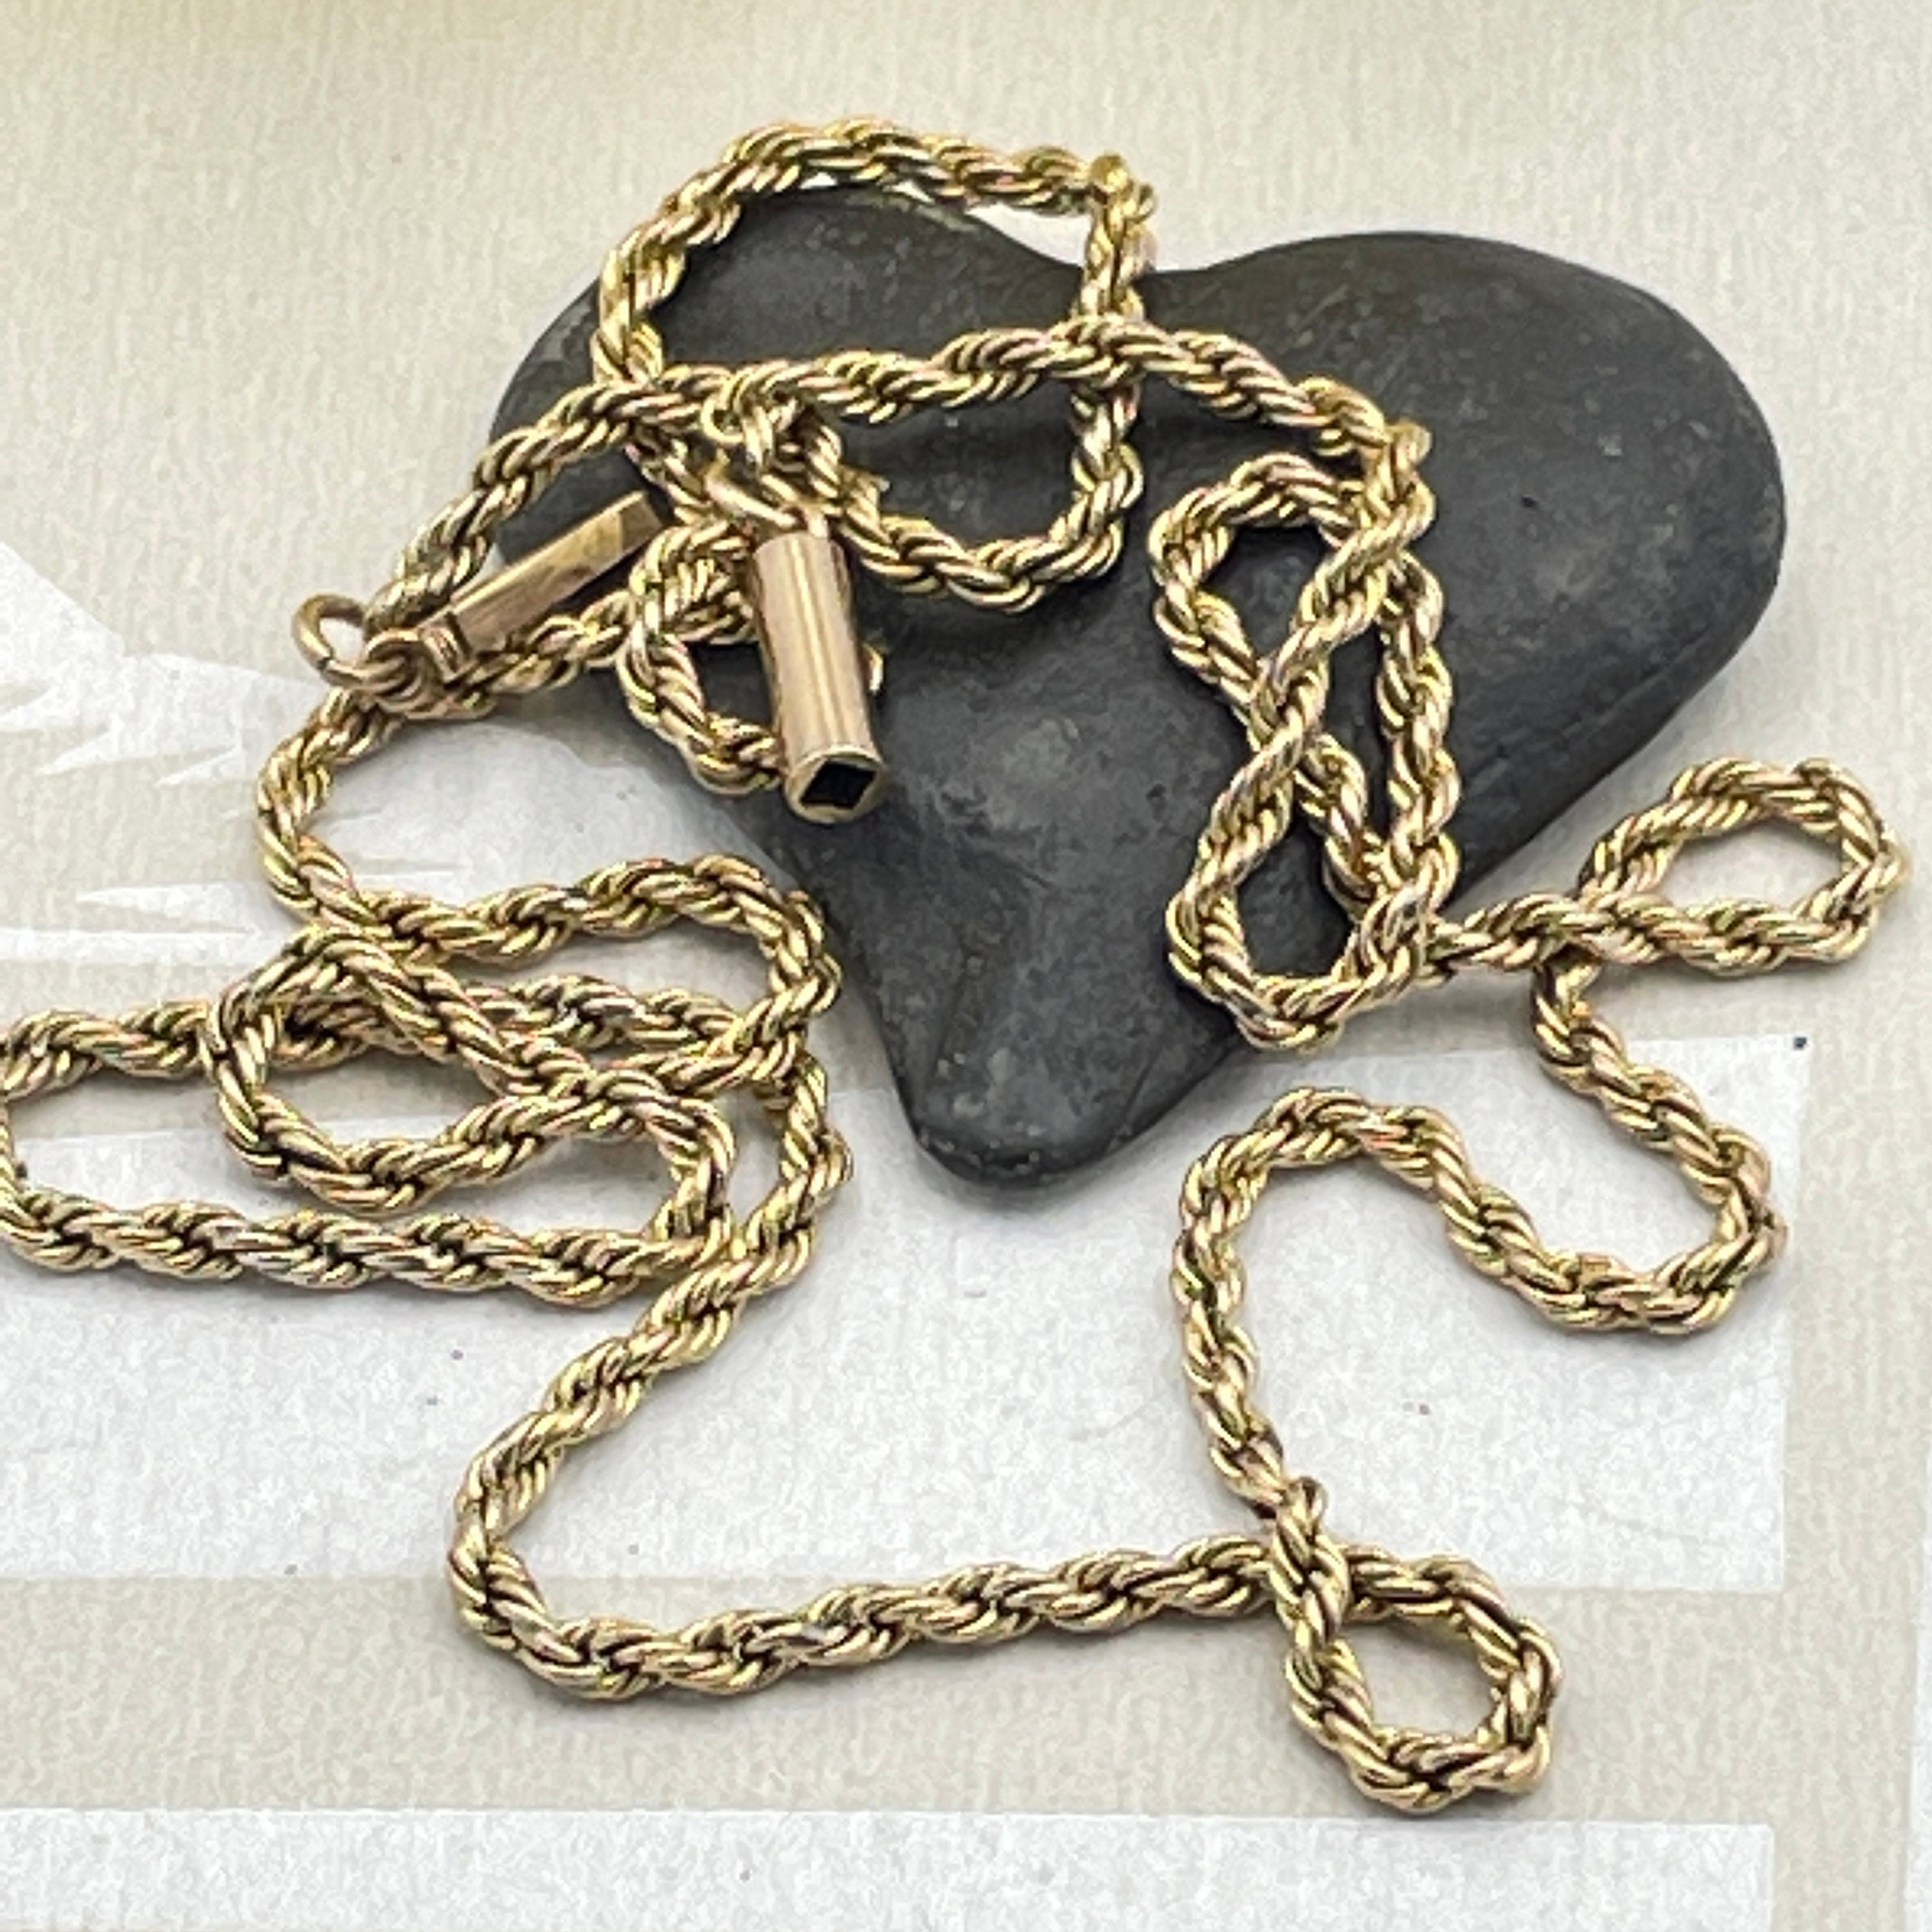 9k gold rope twist chain necklace 